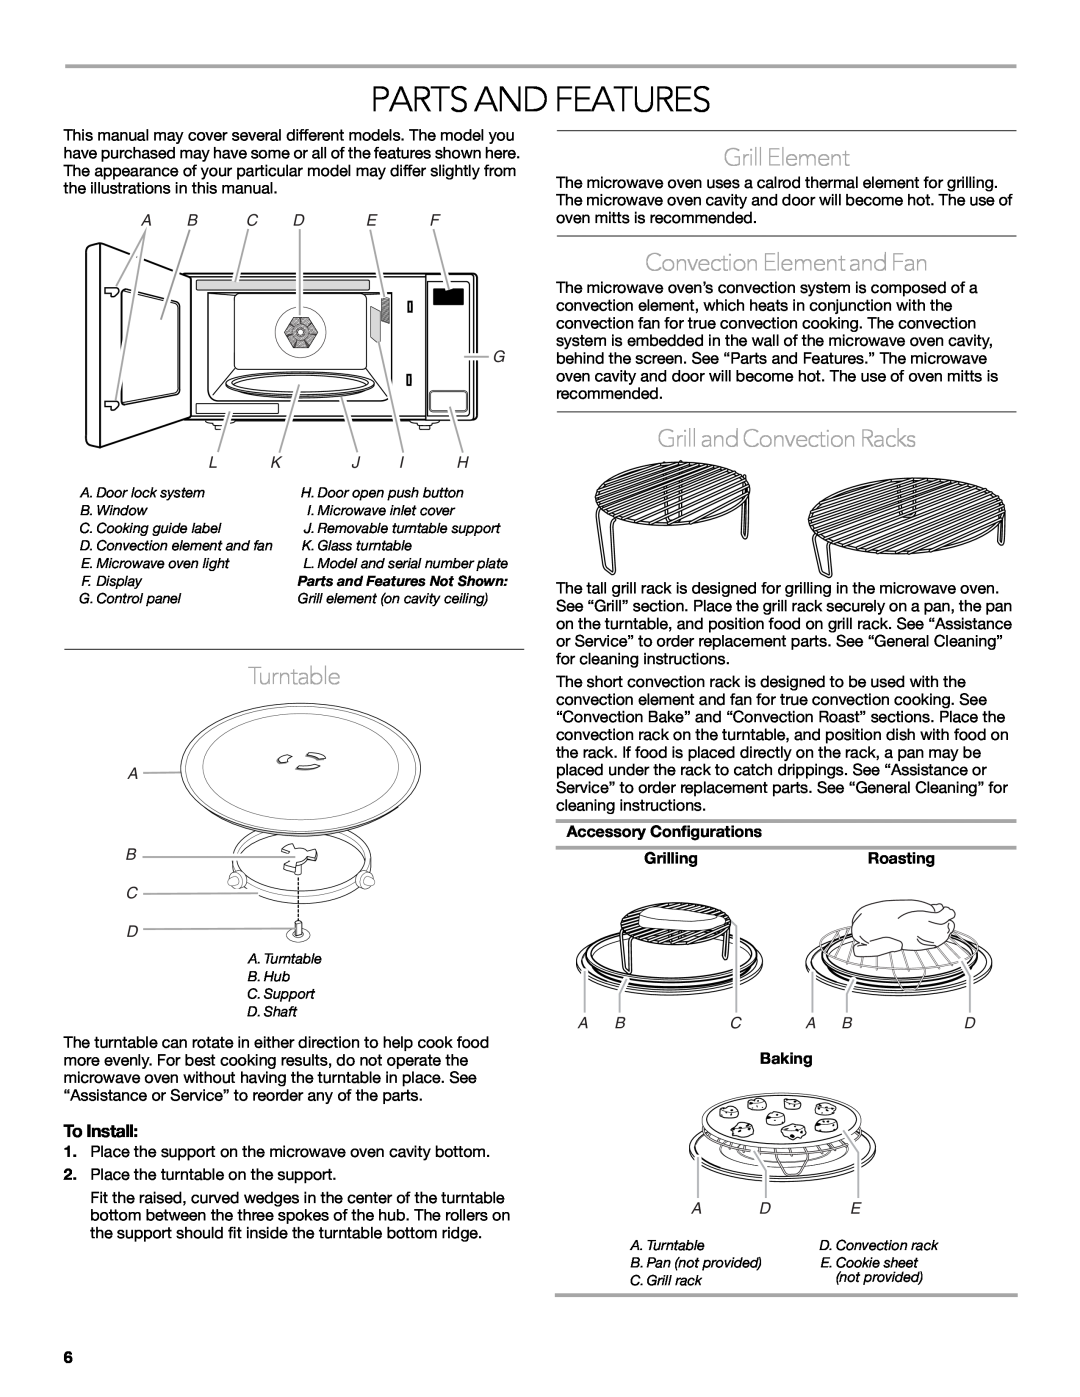 KitchenAid KCMC1575 Parts And Features, Turntable, Grill Element, Convection Element and Fan, Grill and Convection Racks 